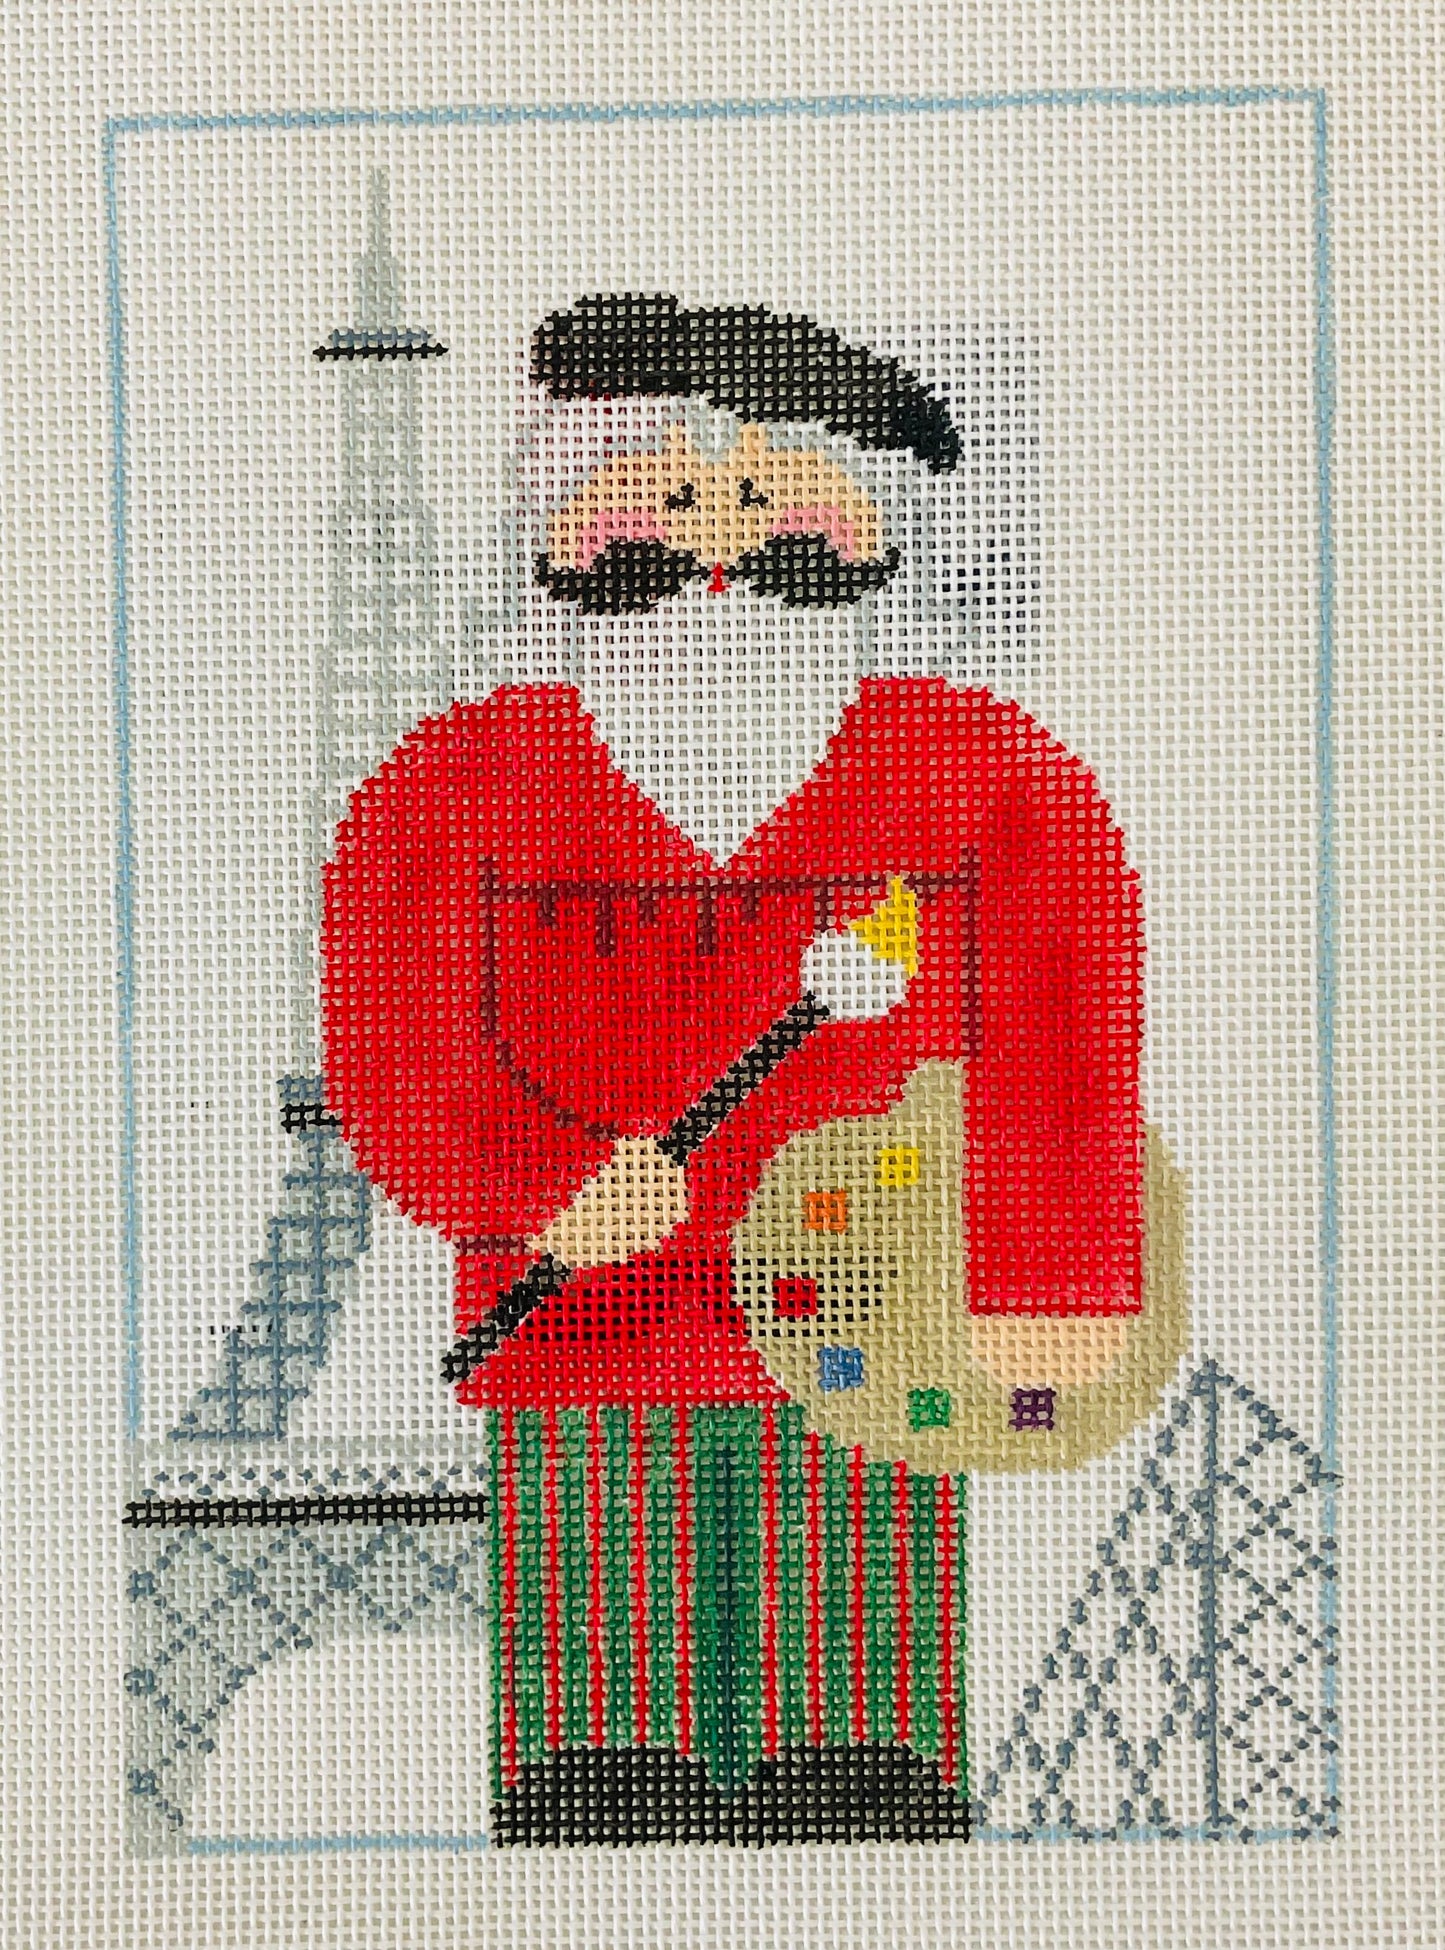 French Artist Santa with Stitch Guide